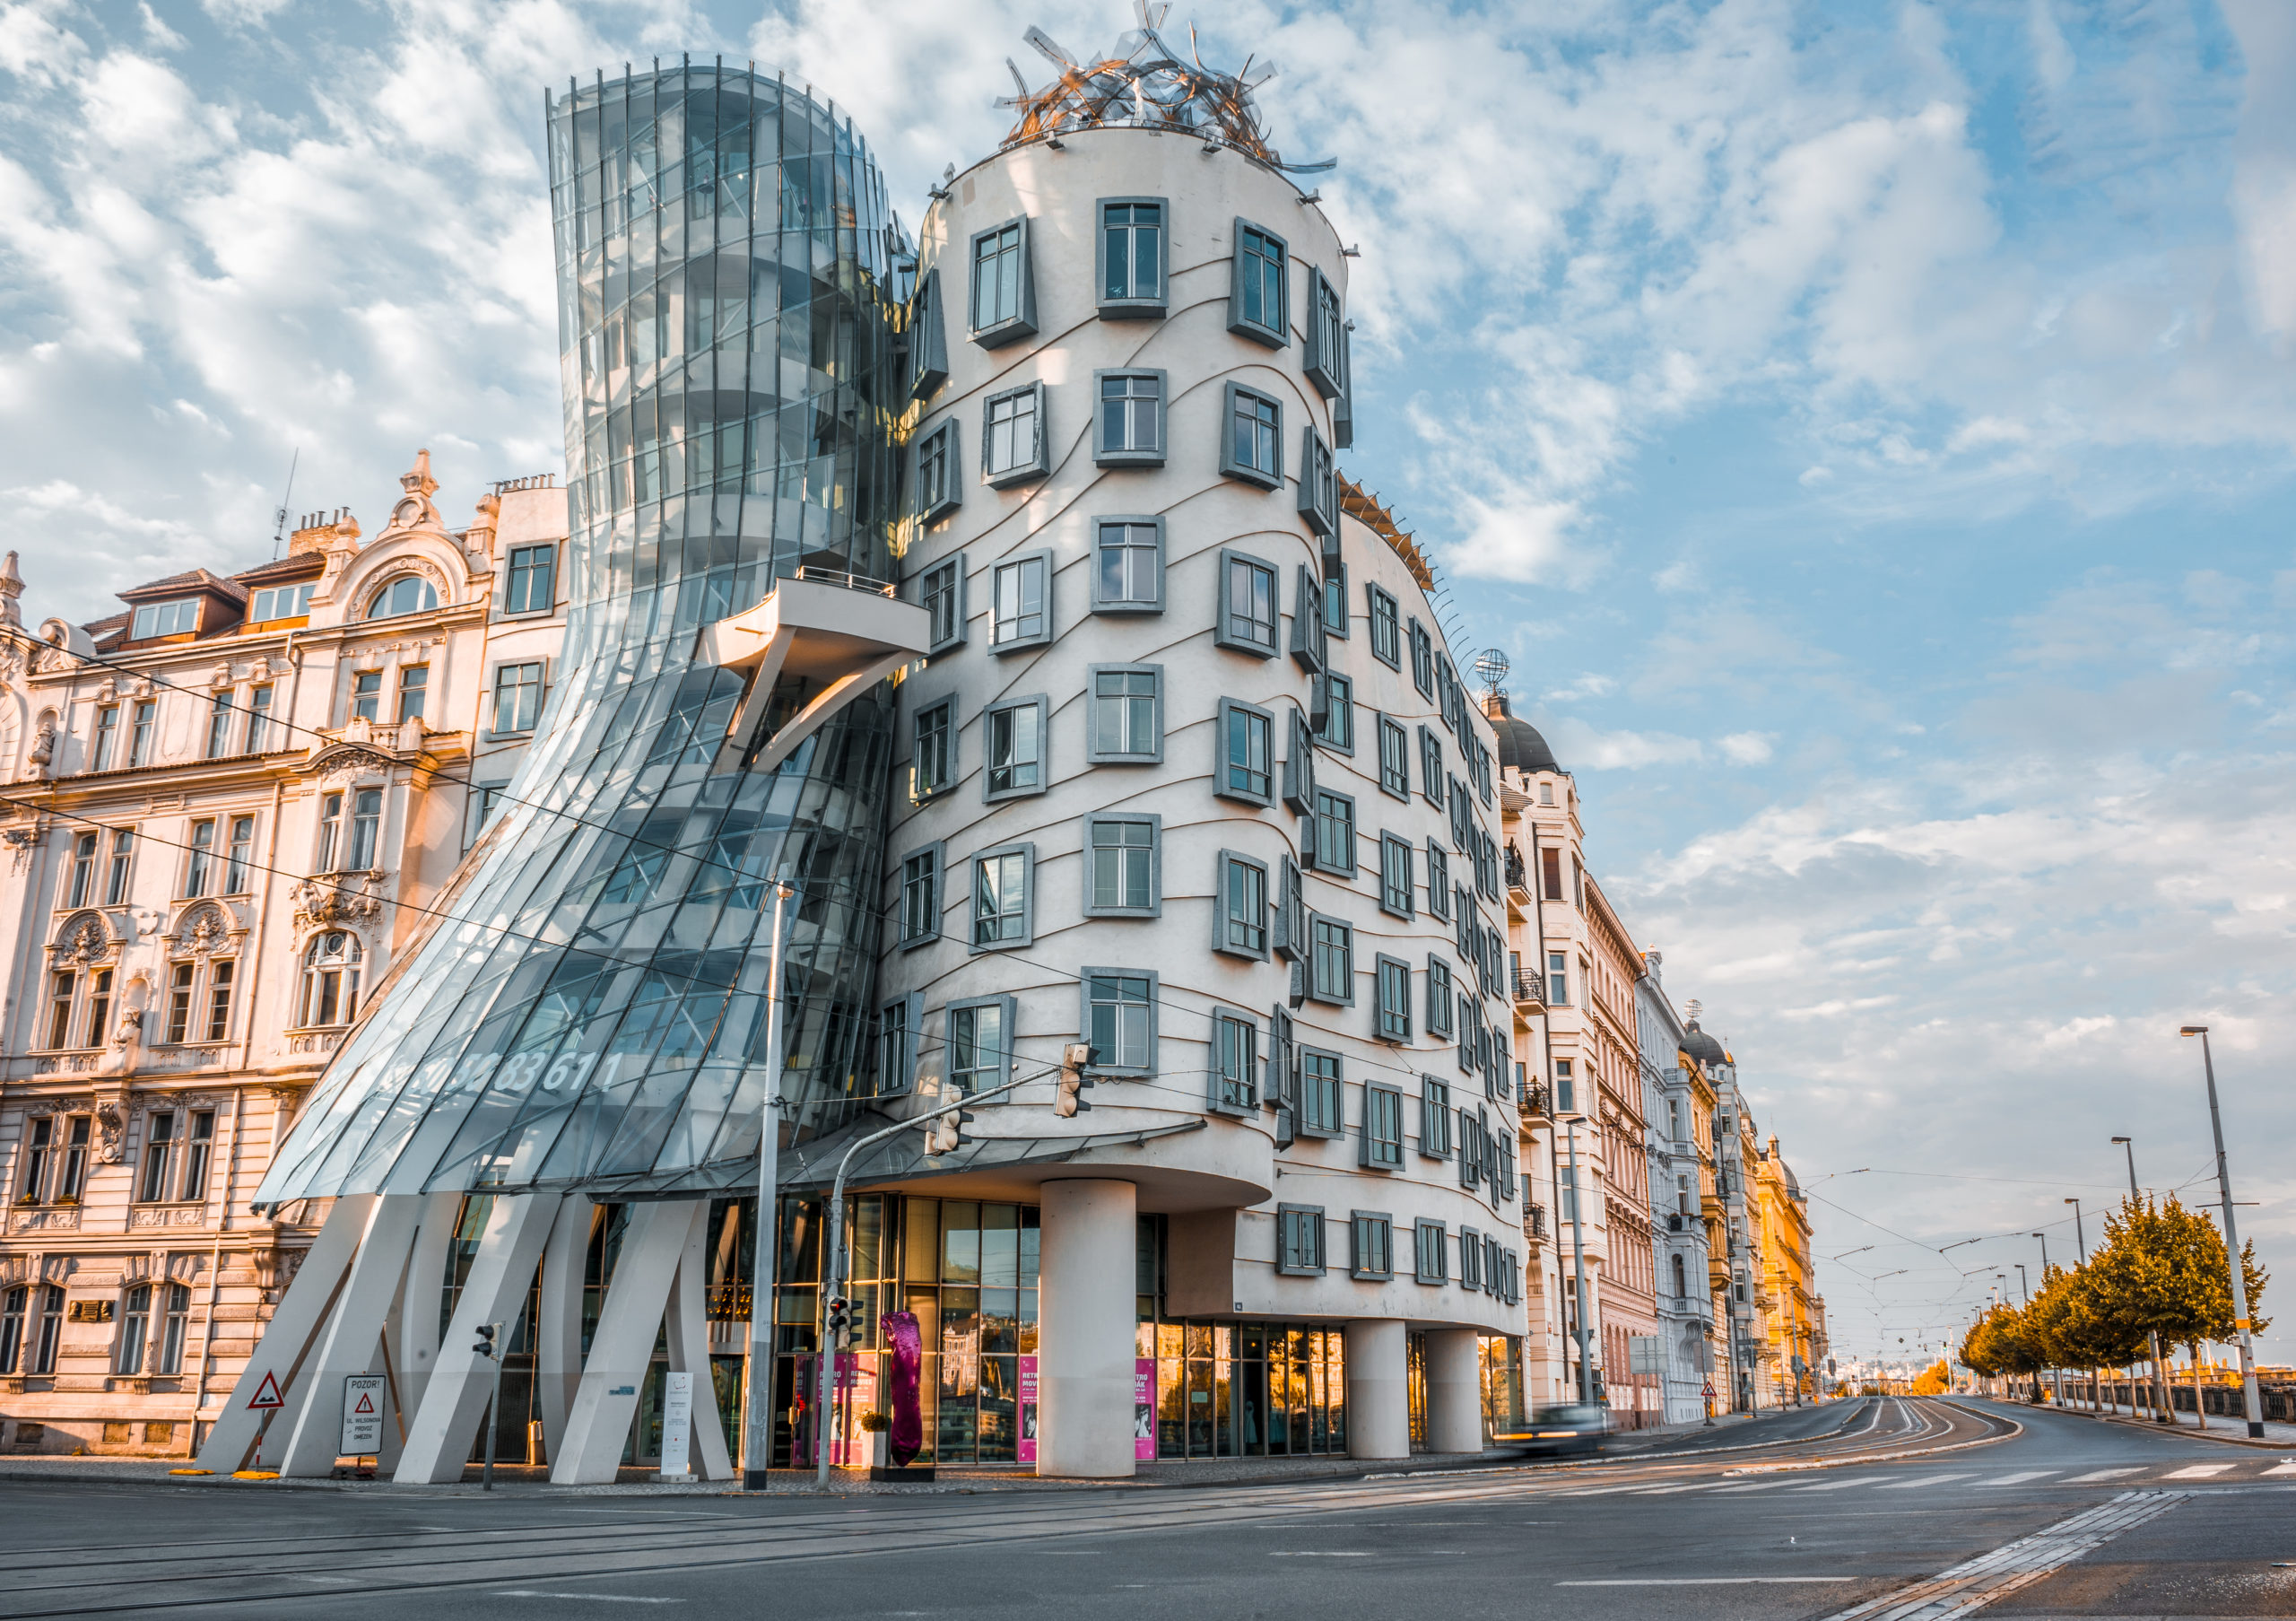 High-rise buildings designed by Frank Gehry : r/dalle2